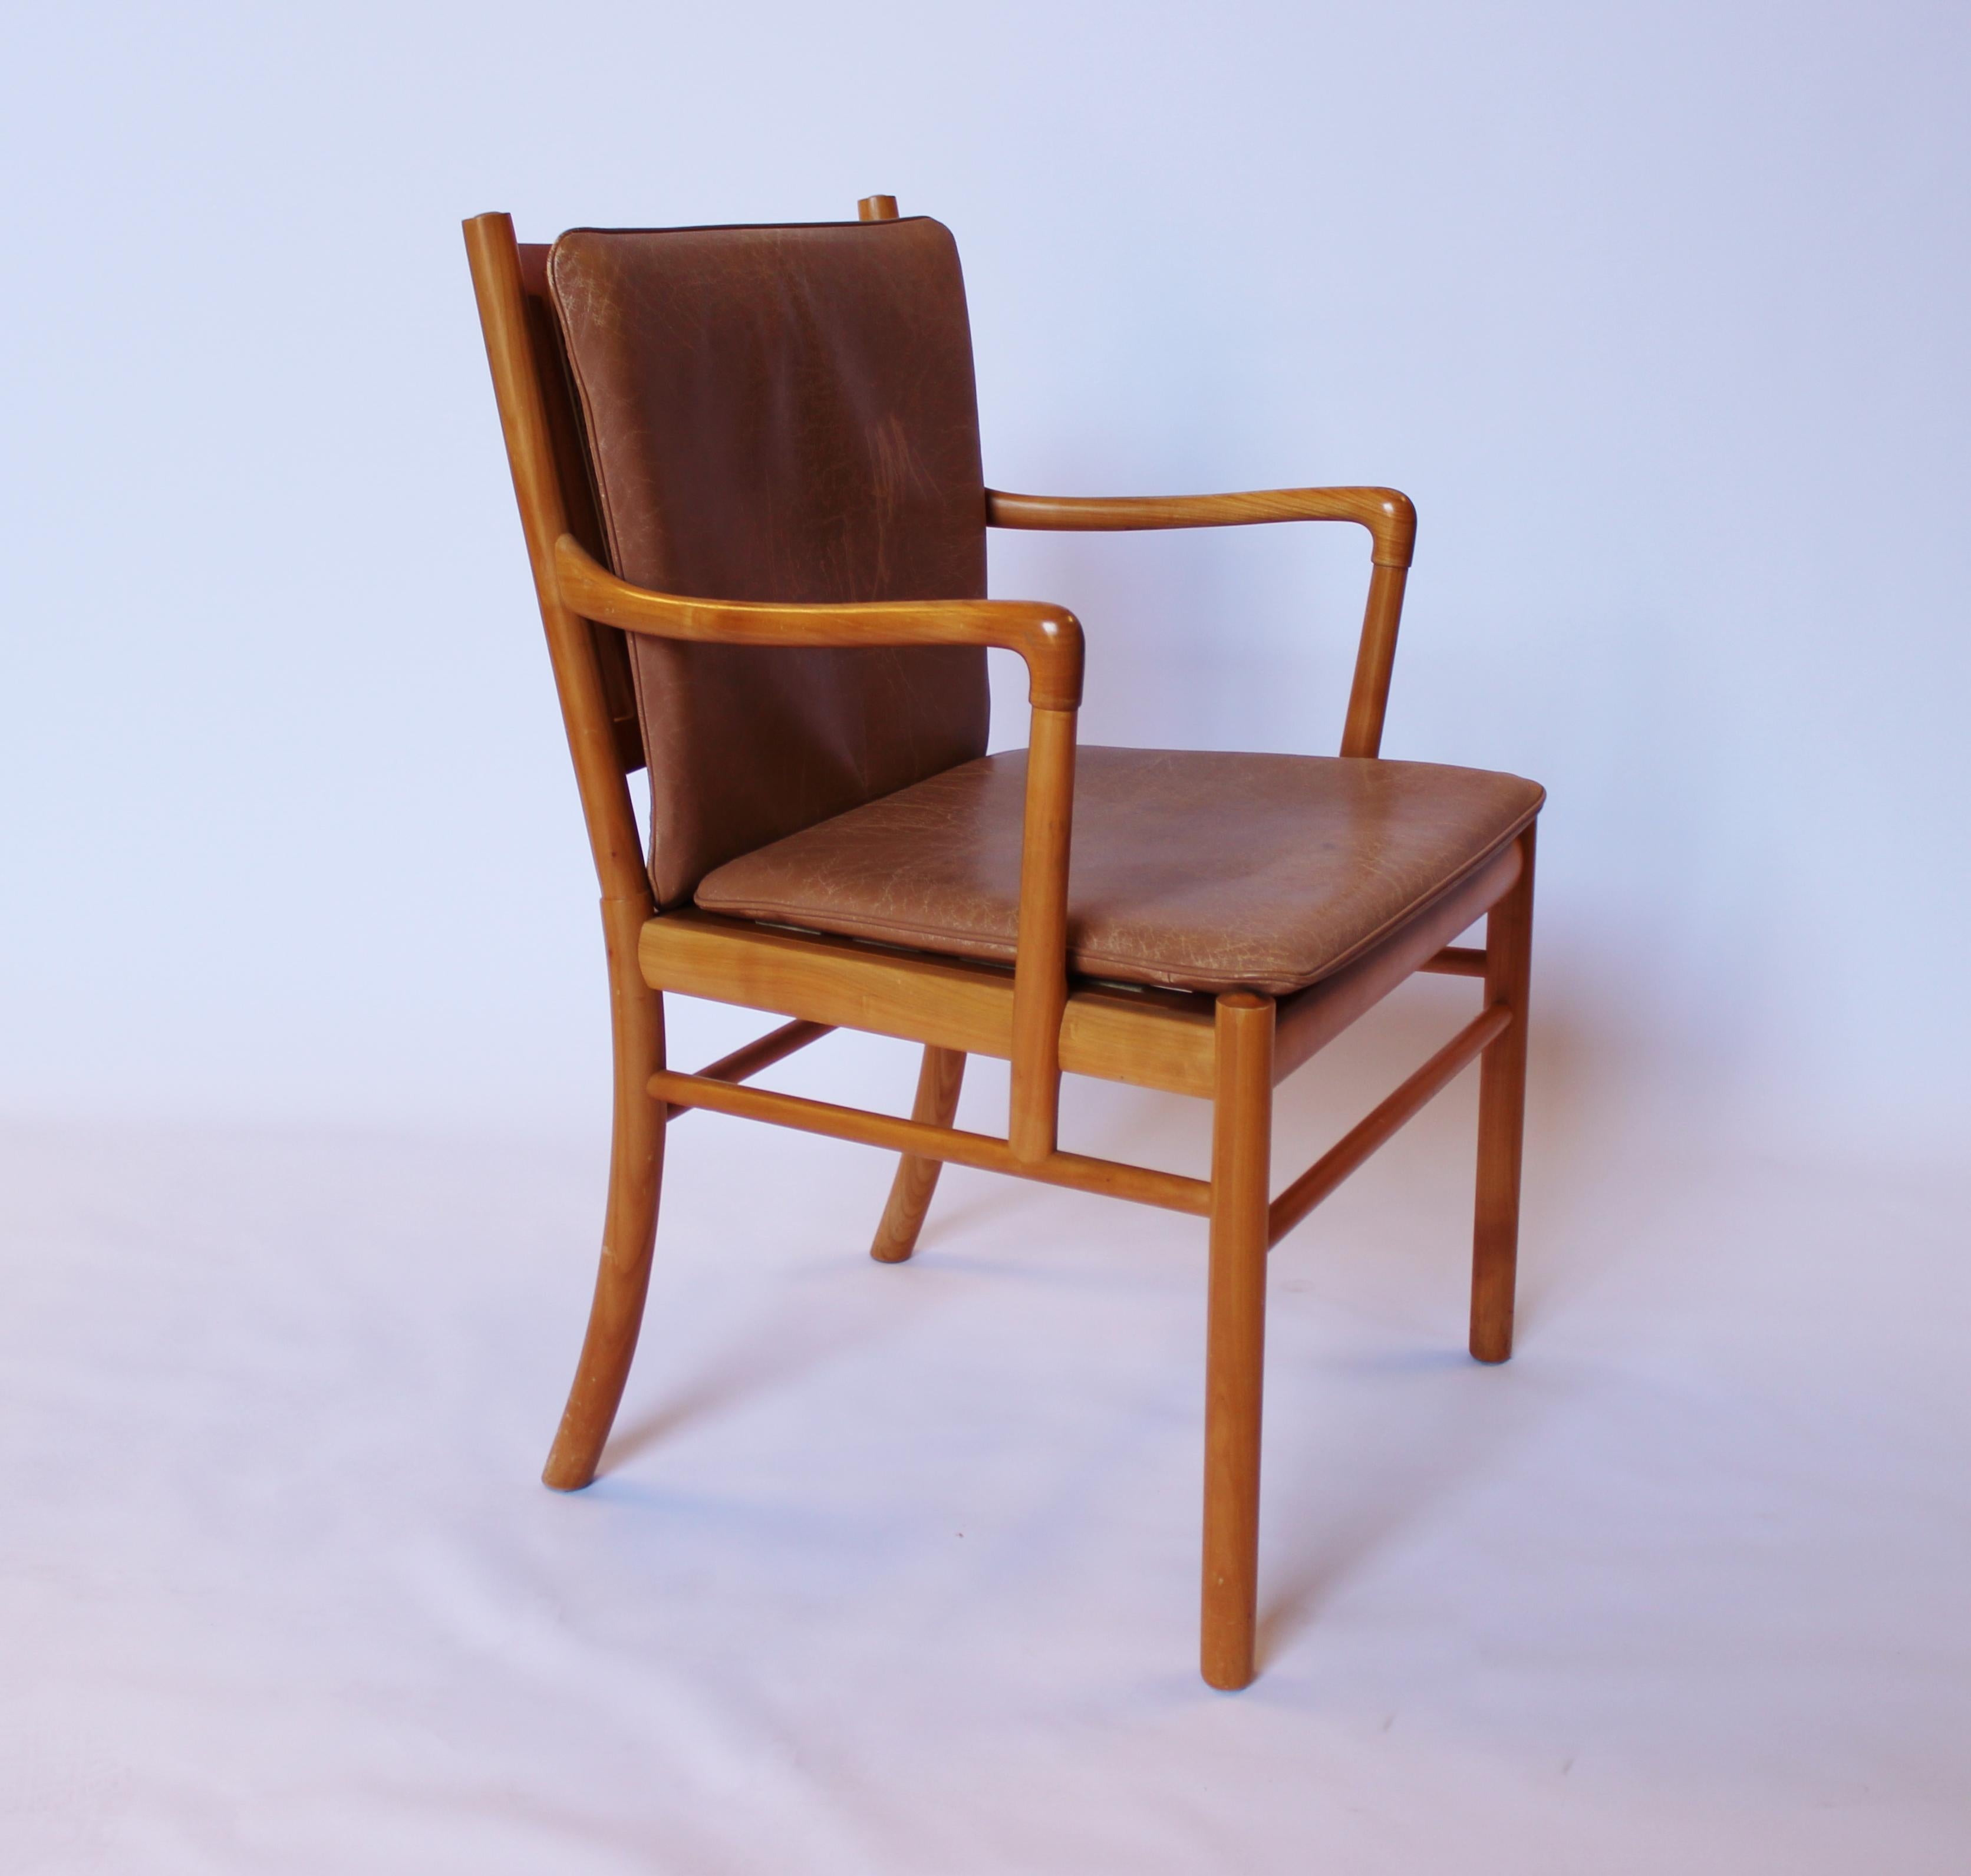 Armchair in mahogany and with cushions of light brown patinated leather, model PJ-301 designed by Ole Wanscher and manufactured by PJ Furniture in the 1960s. The chairs is in great vintage condition.